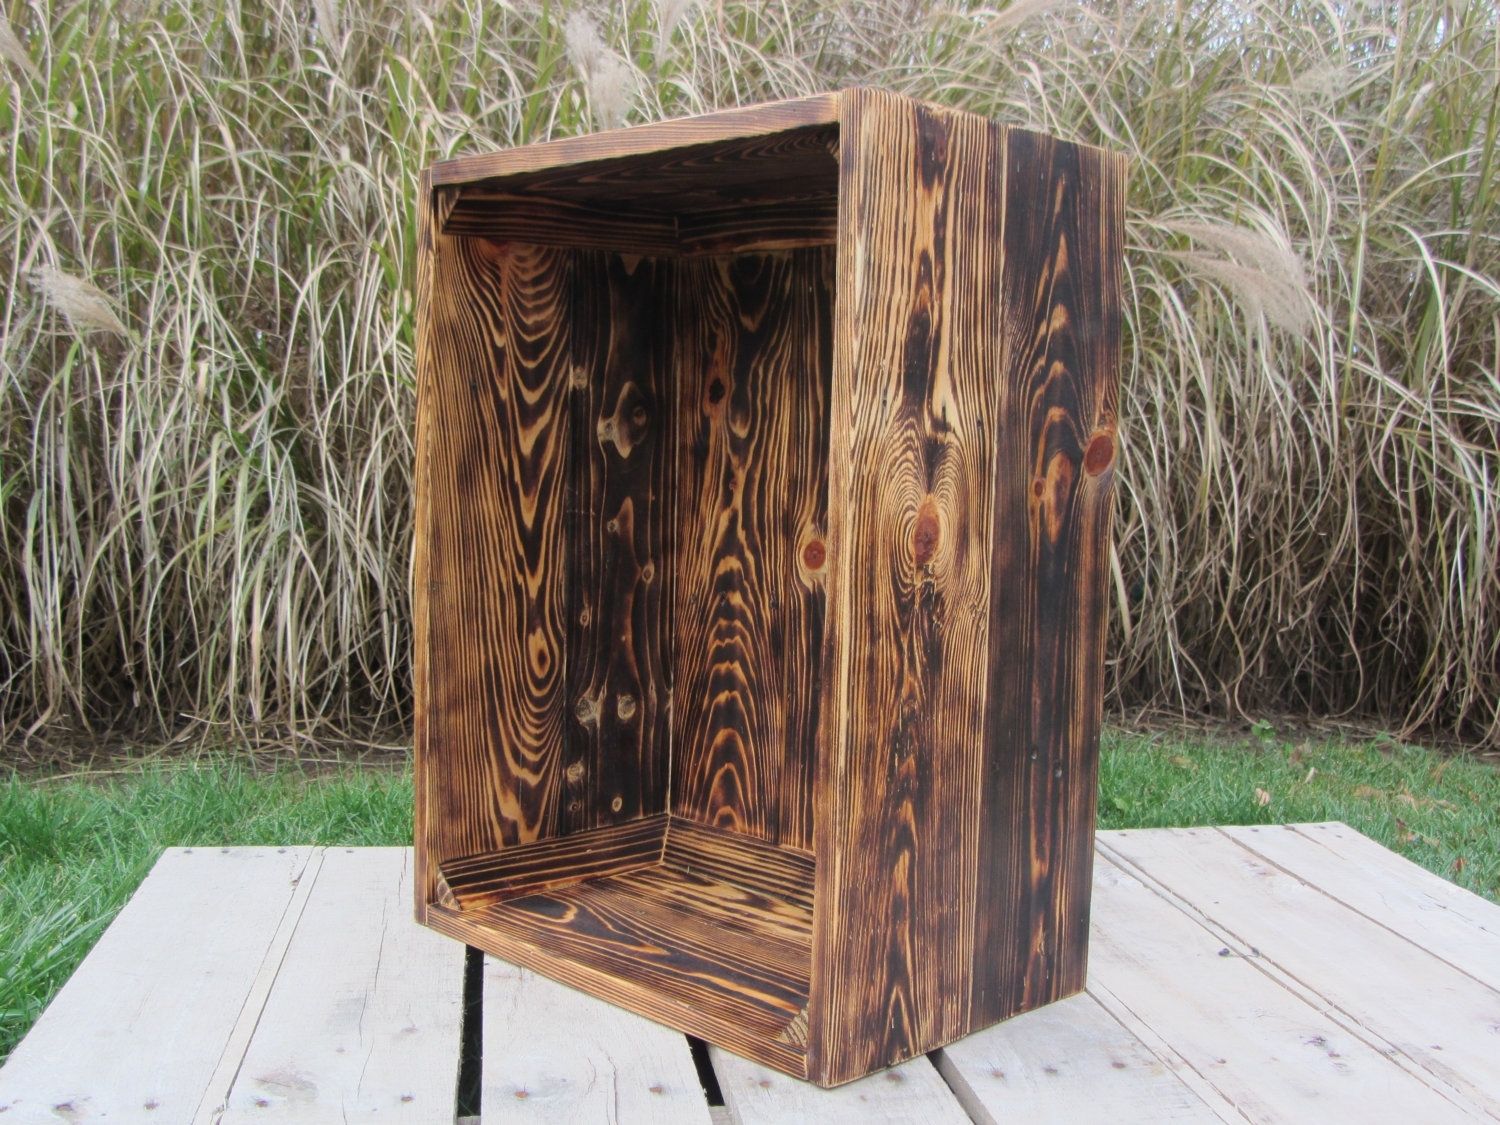 Hand Crafted Large Wood Crate Stackable Made From Reclaimed Wood